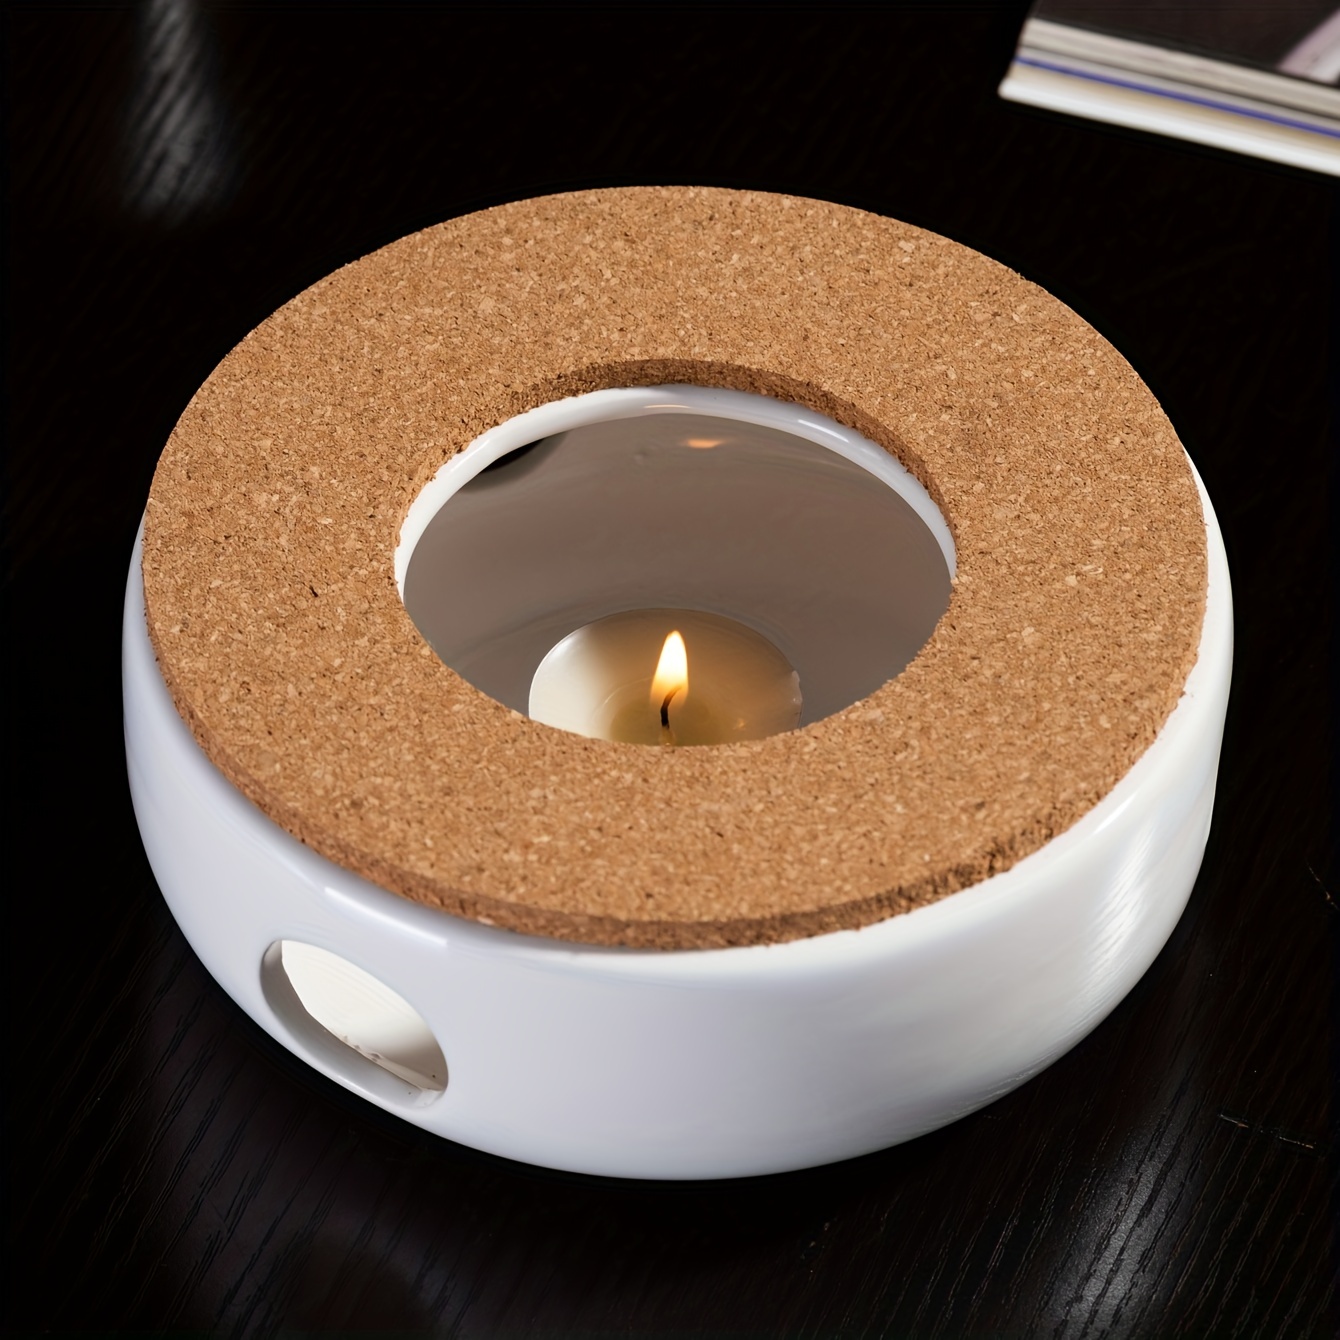 Pottery Candle Stove Candle Tea Light Candle Wax Warmer Living Room  Decoration Tea Light Oven Terracotta Candle Heater (Color : Brown)